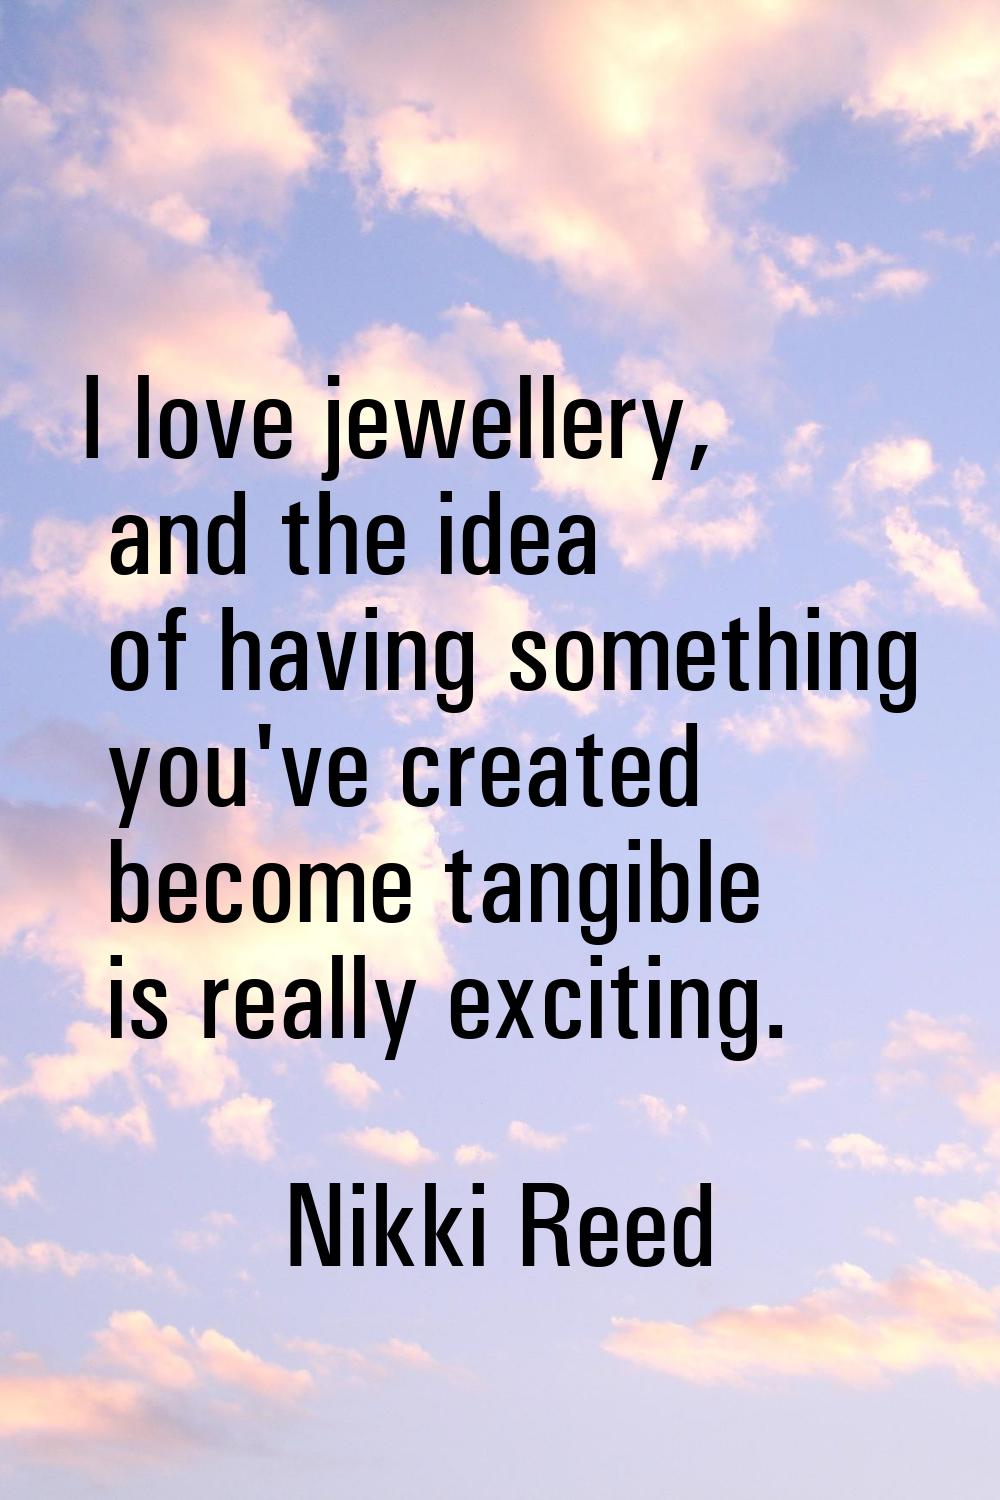 I love jewellery, and the idea of having something you've created become tangible is really excitin